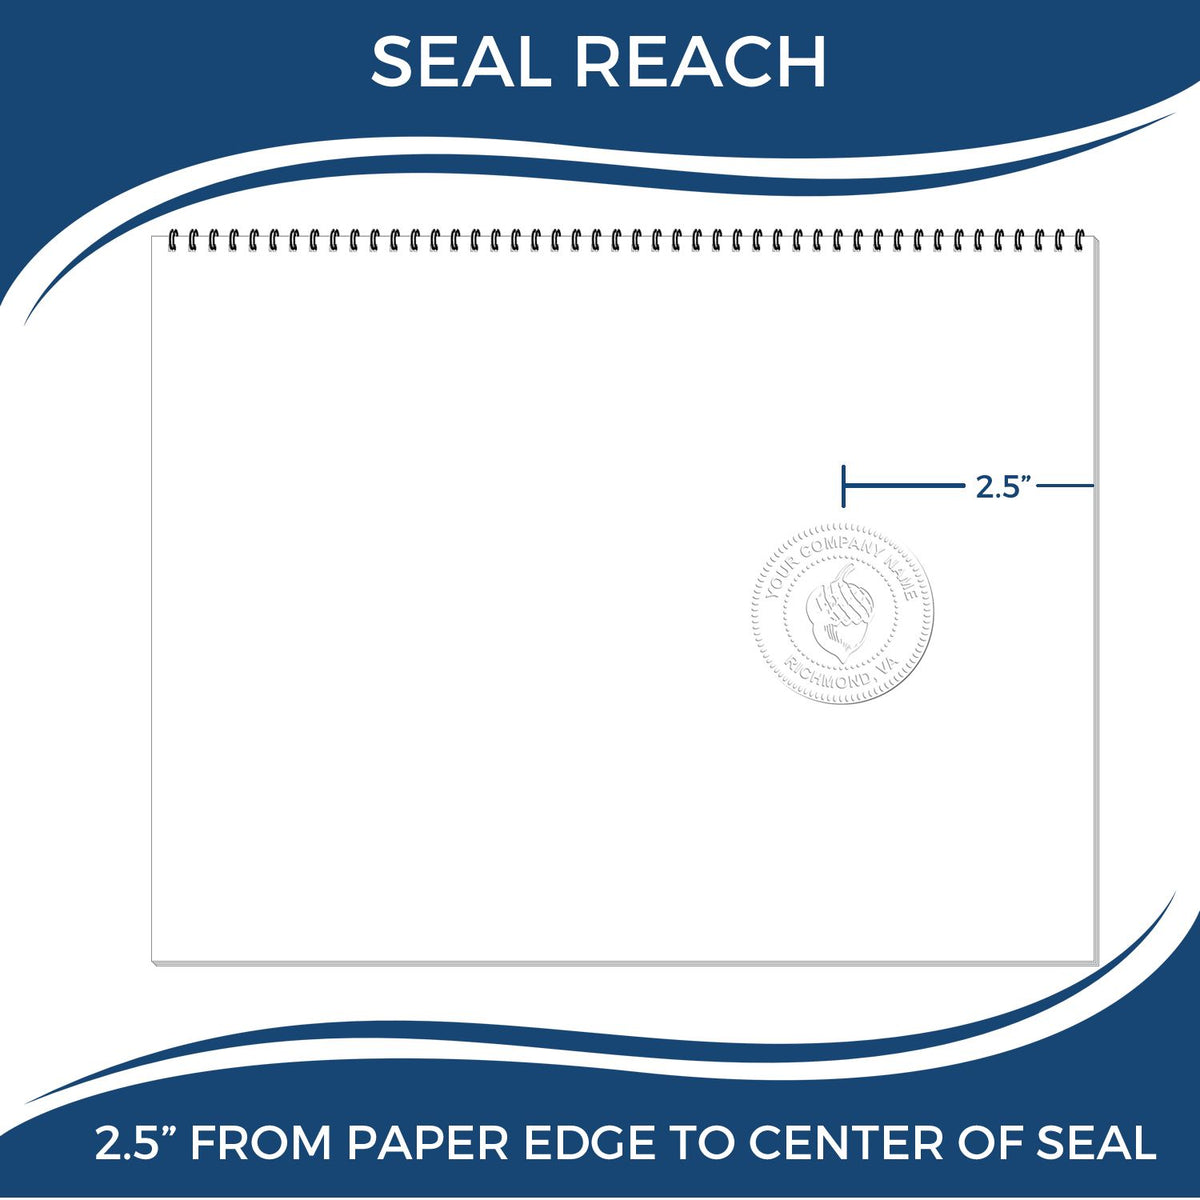 An infographic showing the seal reach which is represented by a ruler and a miniature seal image of the Heavy Duty Cast Iron Arkansas Geologist Seal Embosser